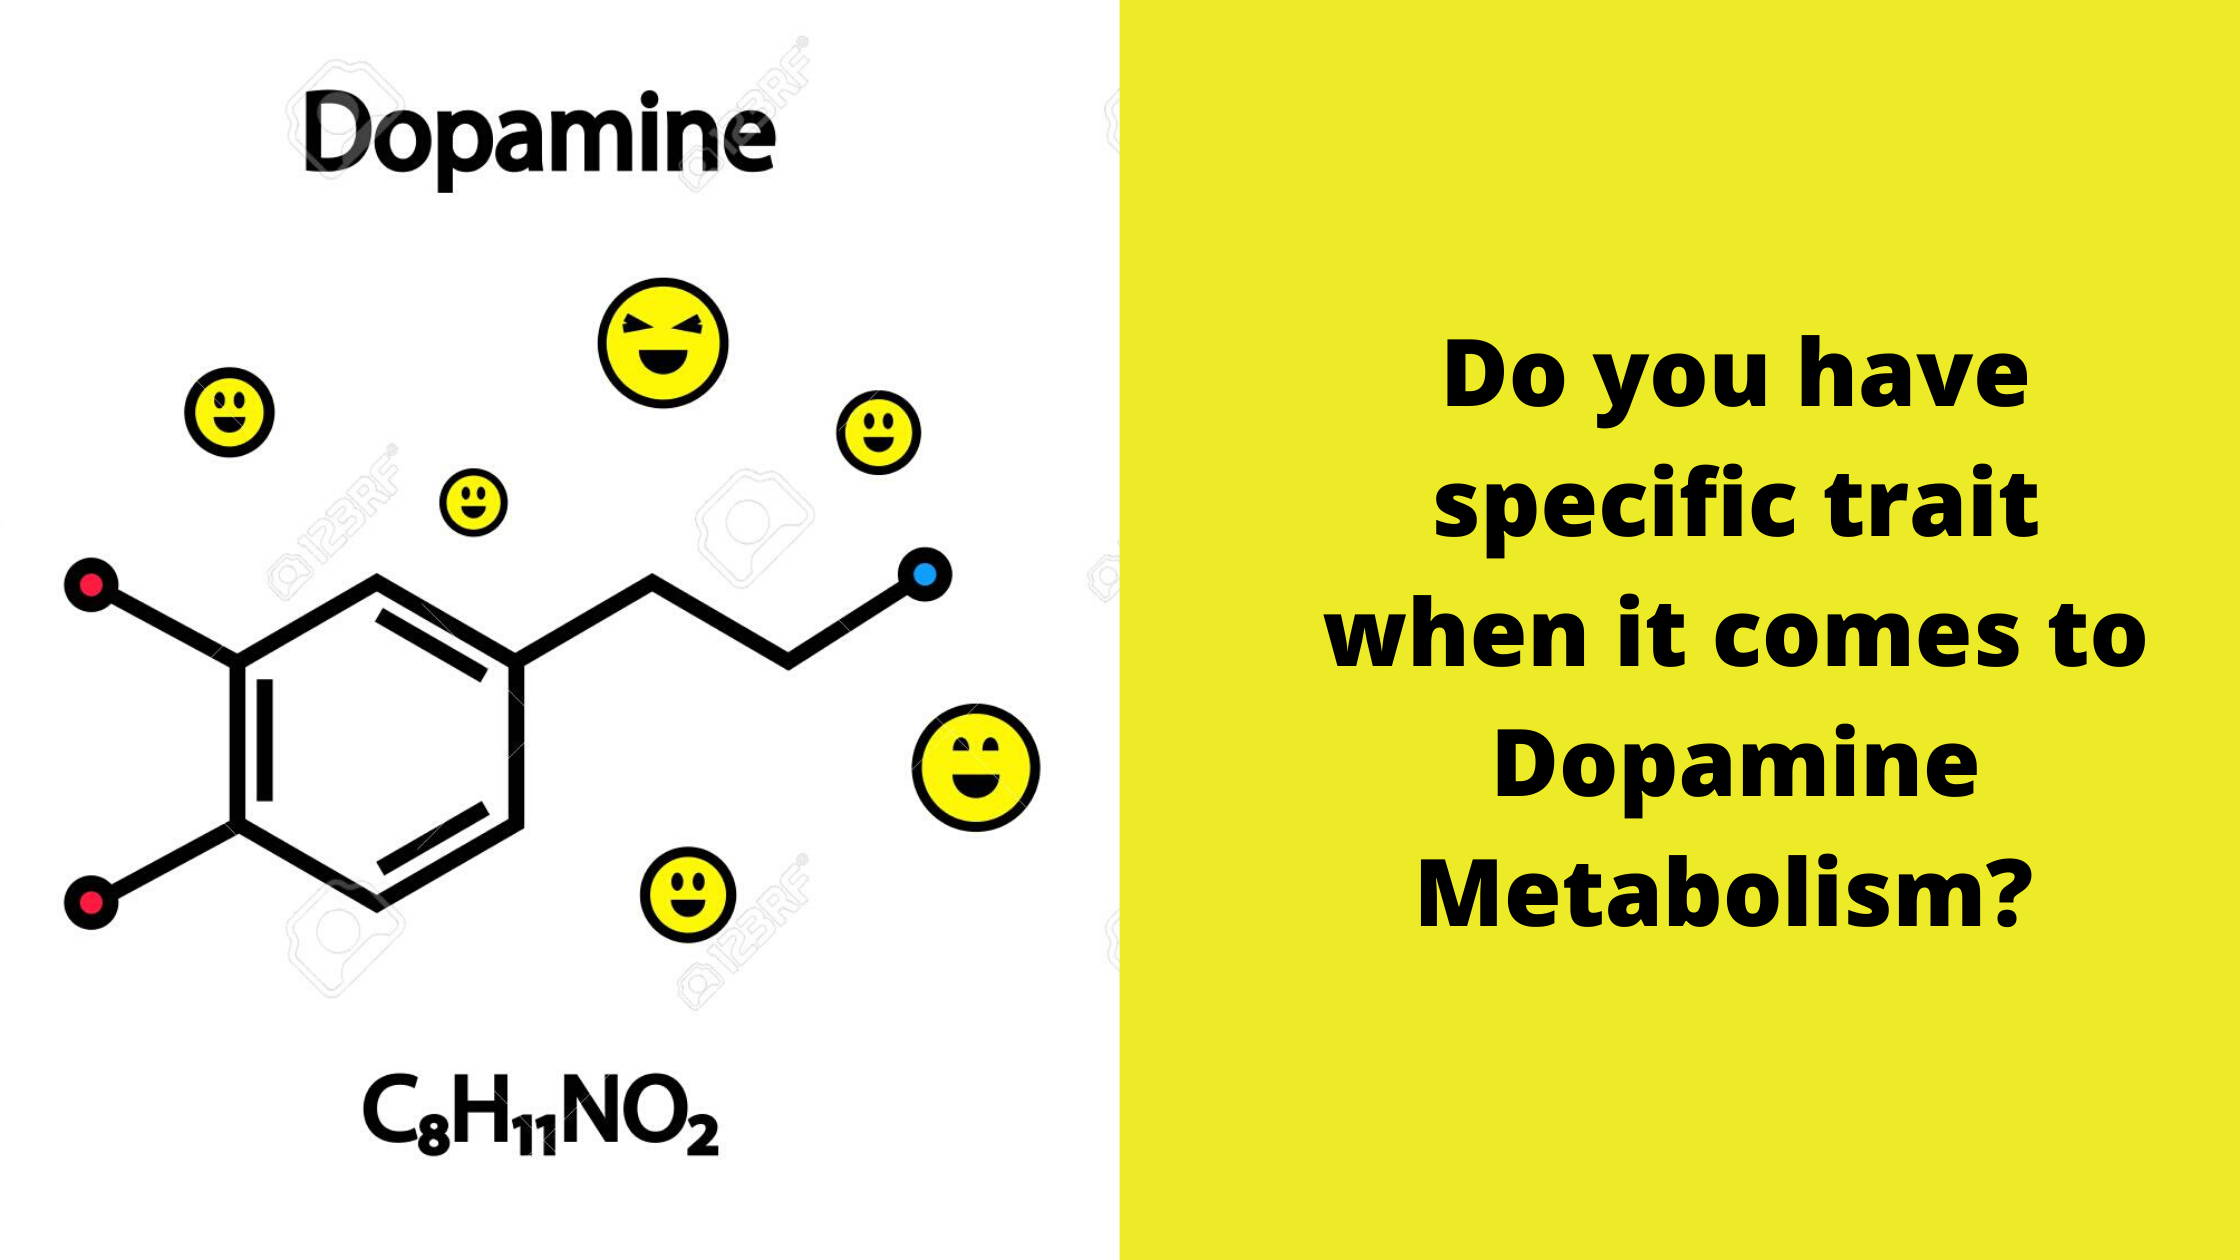 Do you have specific trait when it comes to Dopamine Metabolism?